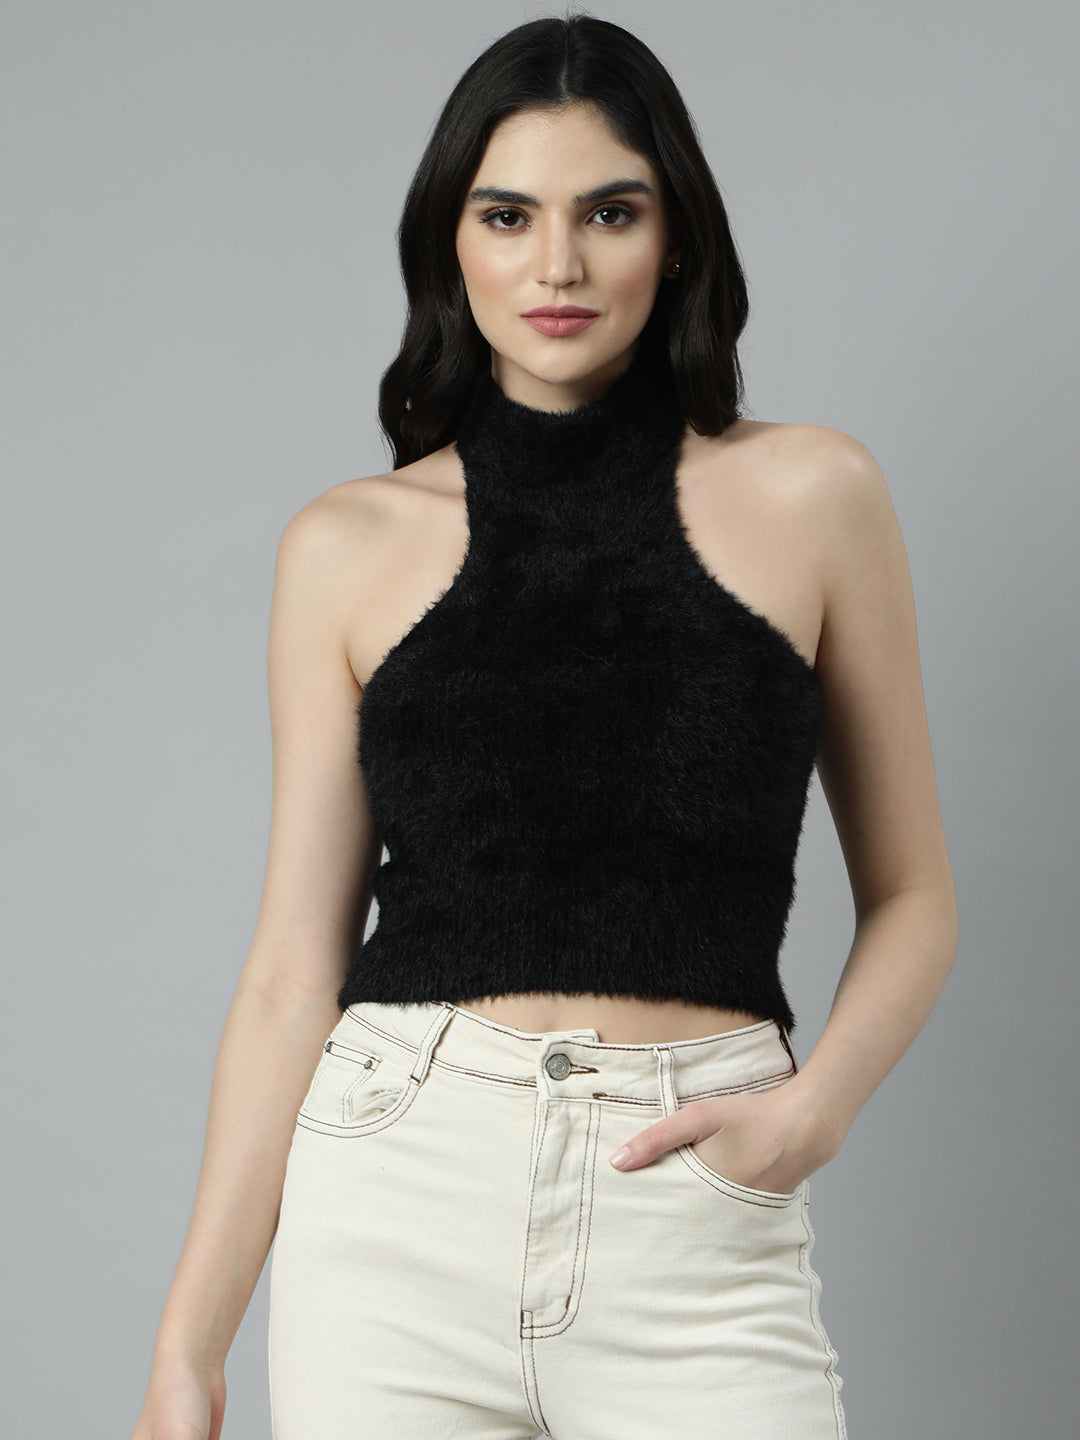 Women Solid Black Fitted Crop Top